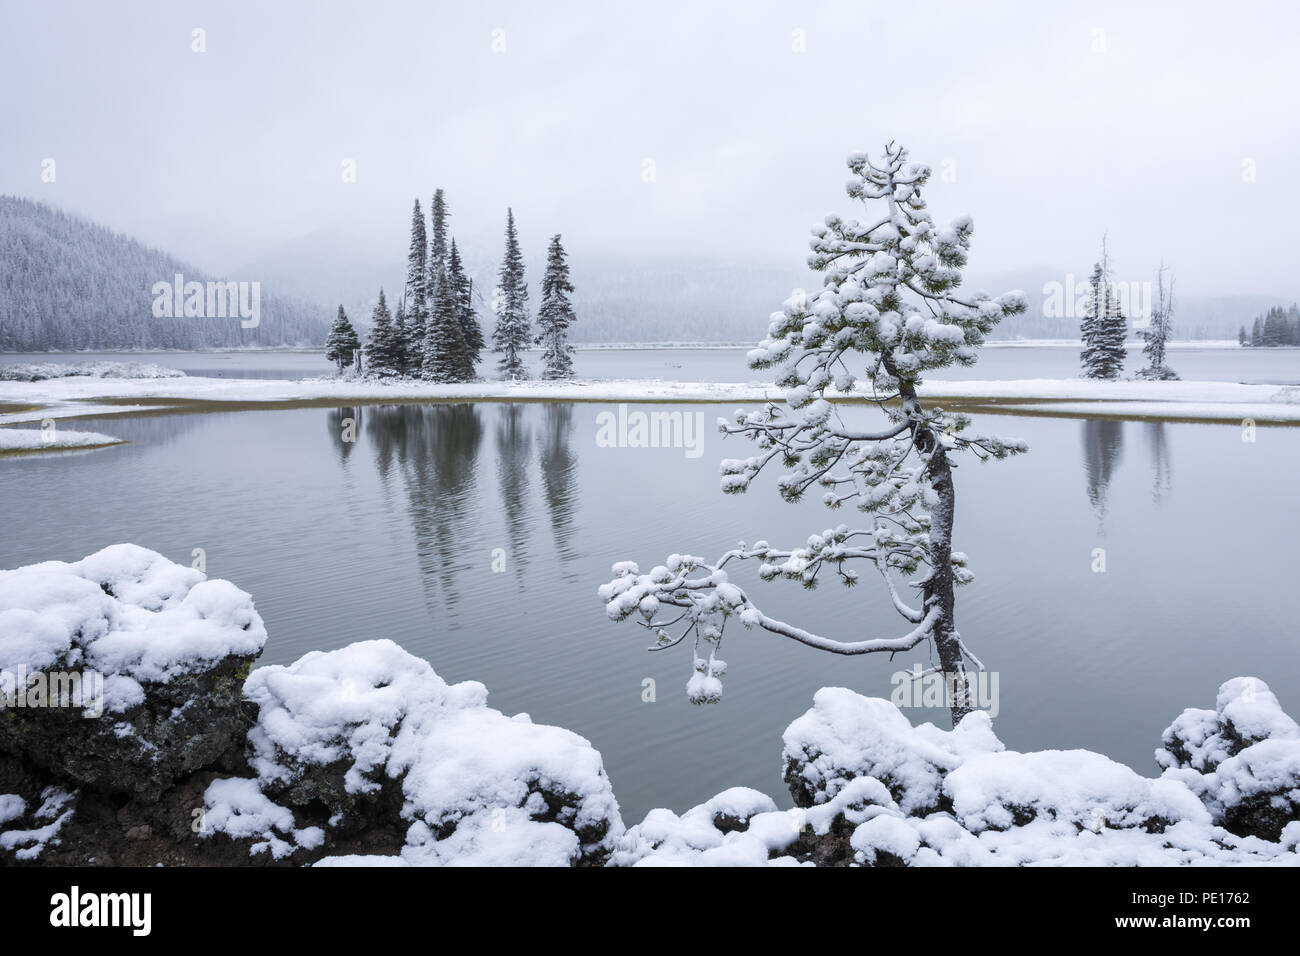 A light snowfall covers the trees, rocks, and mountains surrounding Sparks Lake in Central Oregon on an early morning in June. Stock Photo